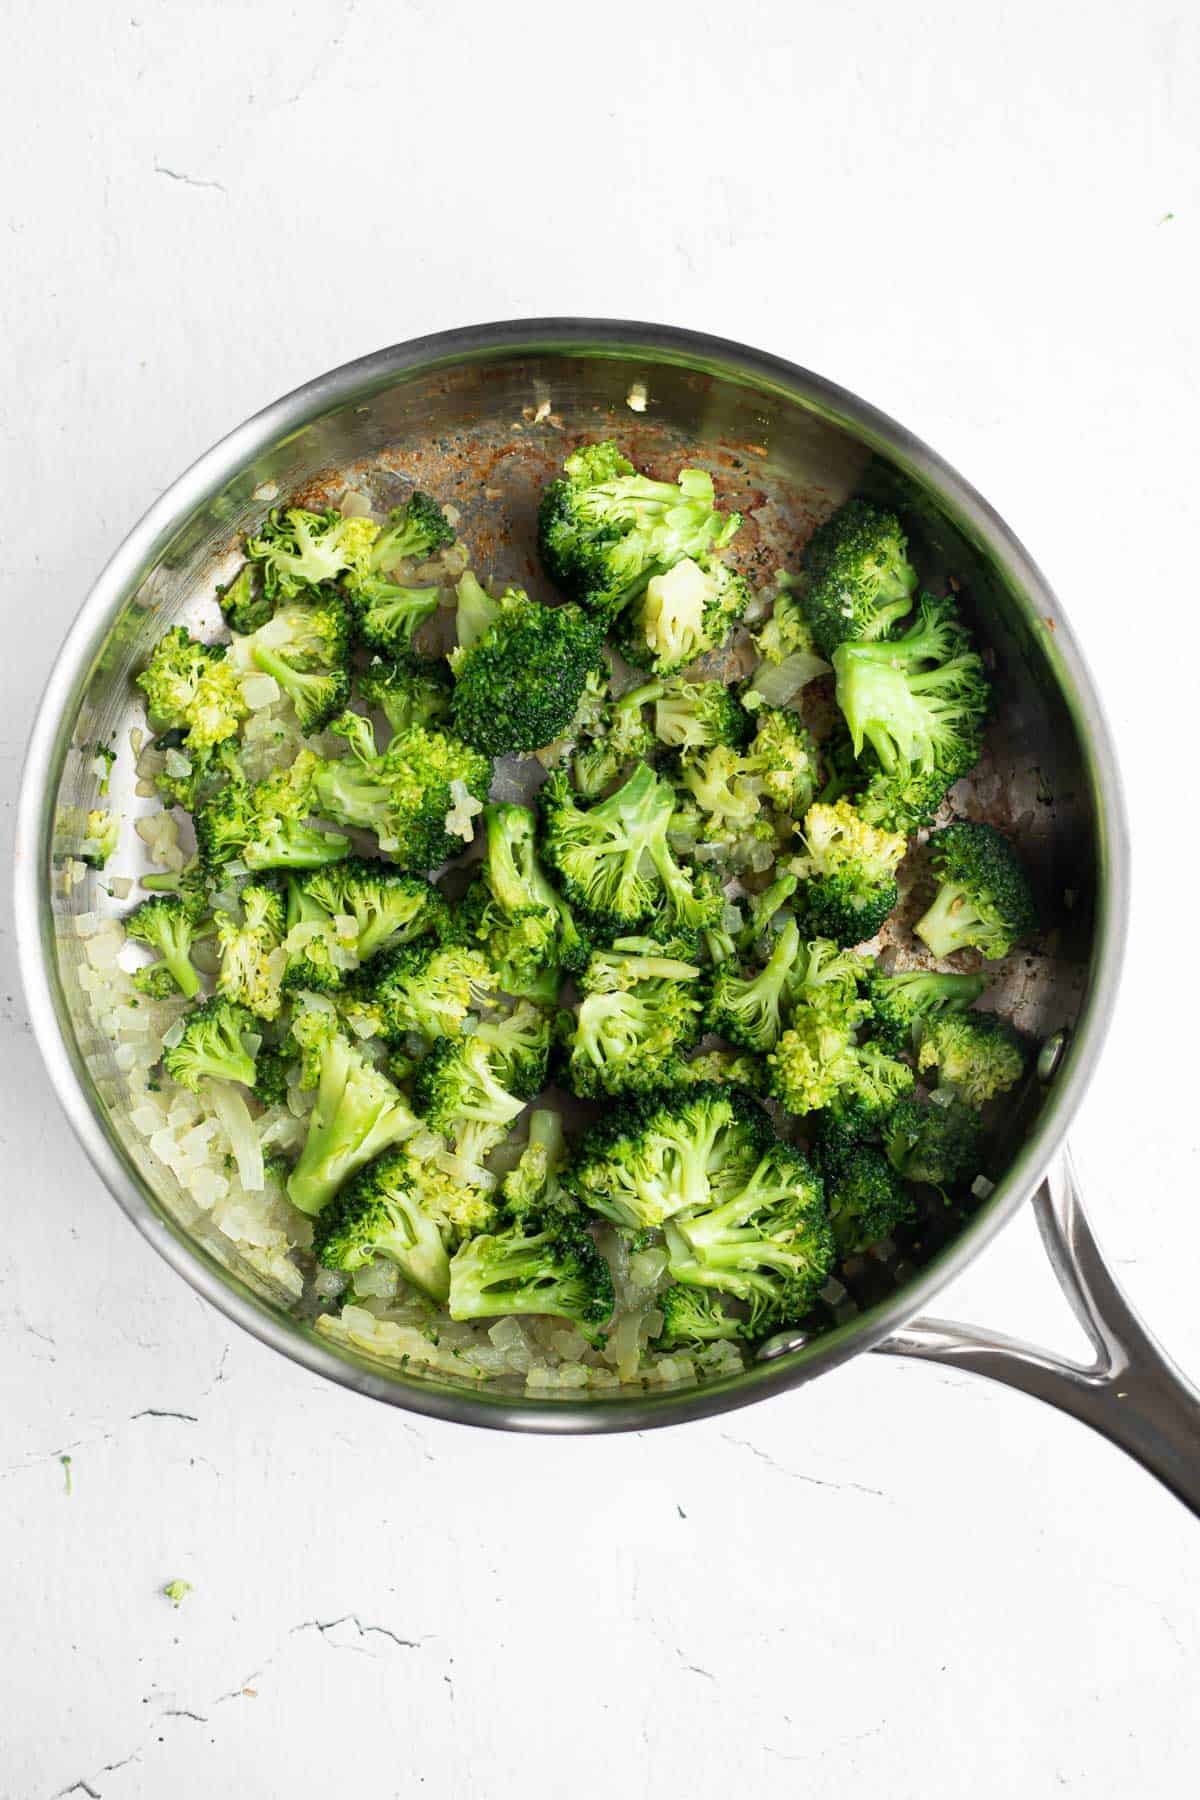 sauteed broccoli and onion in a stainless steel pan.